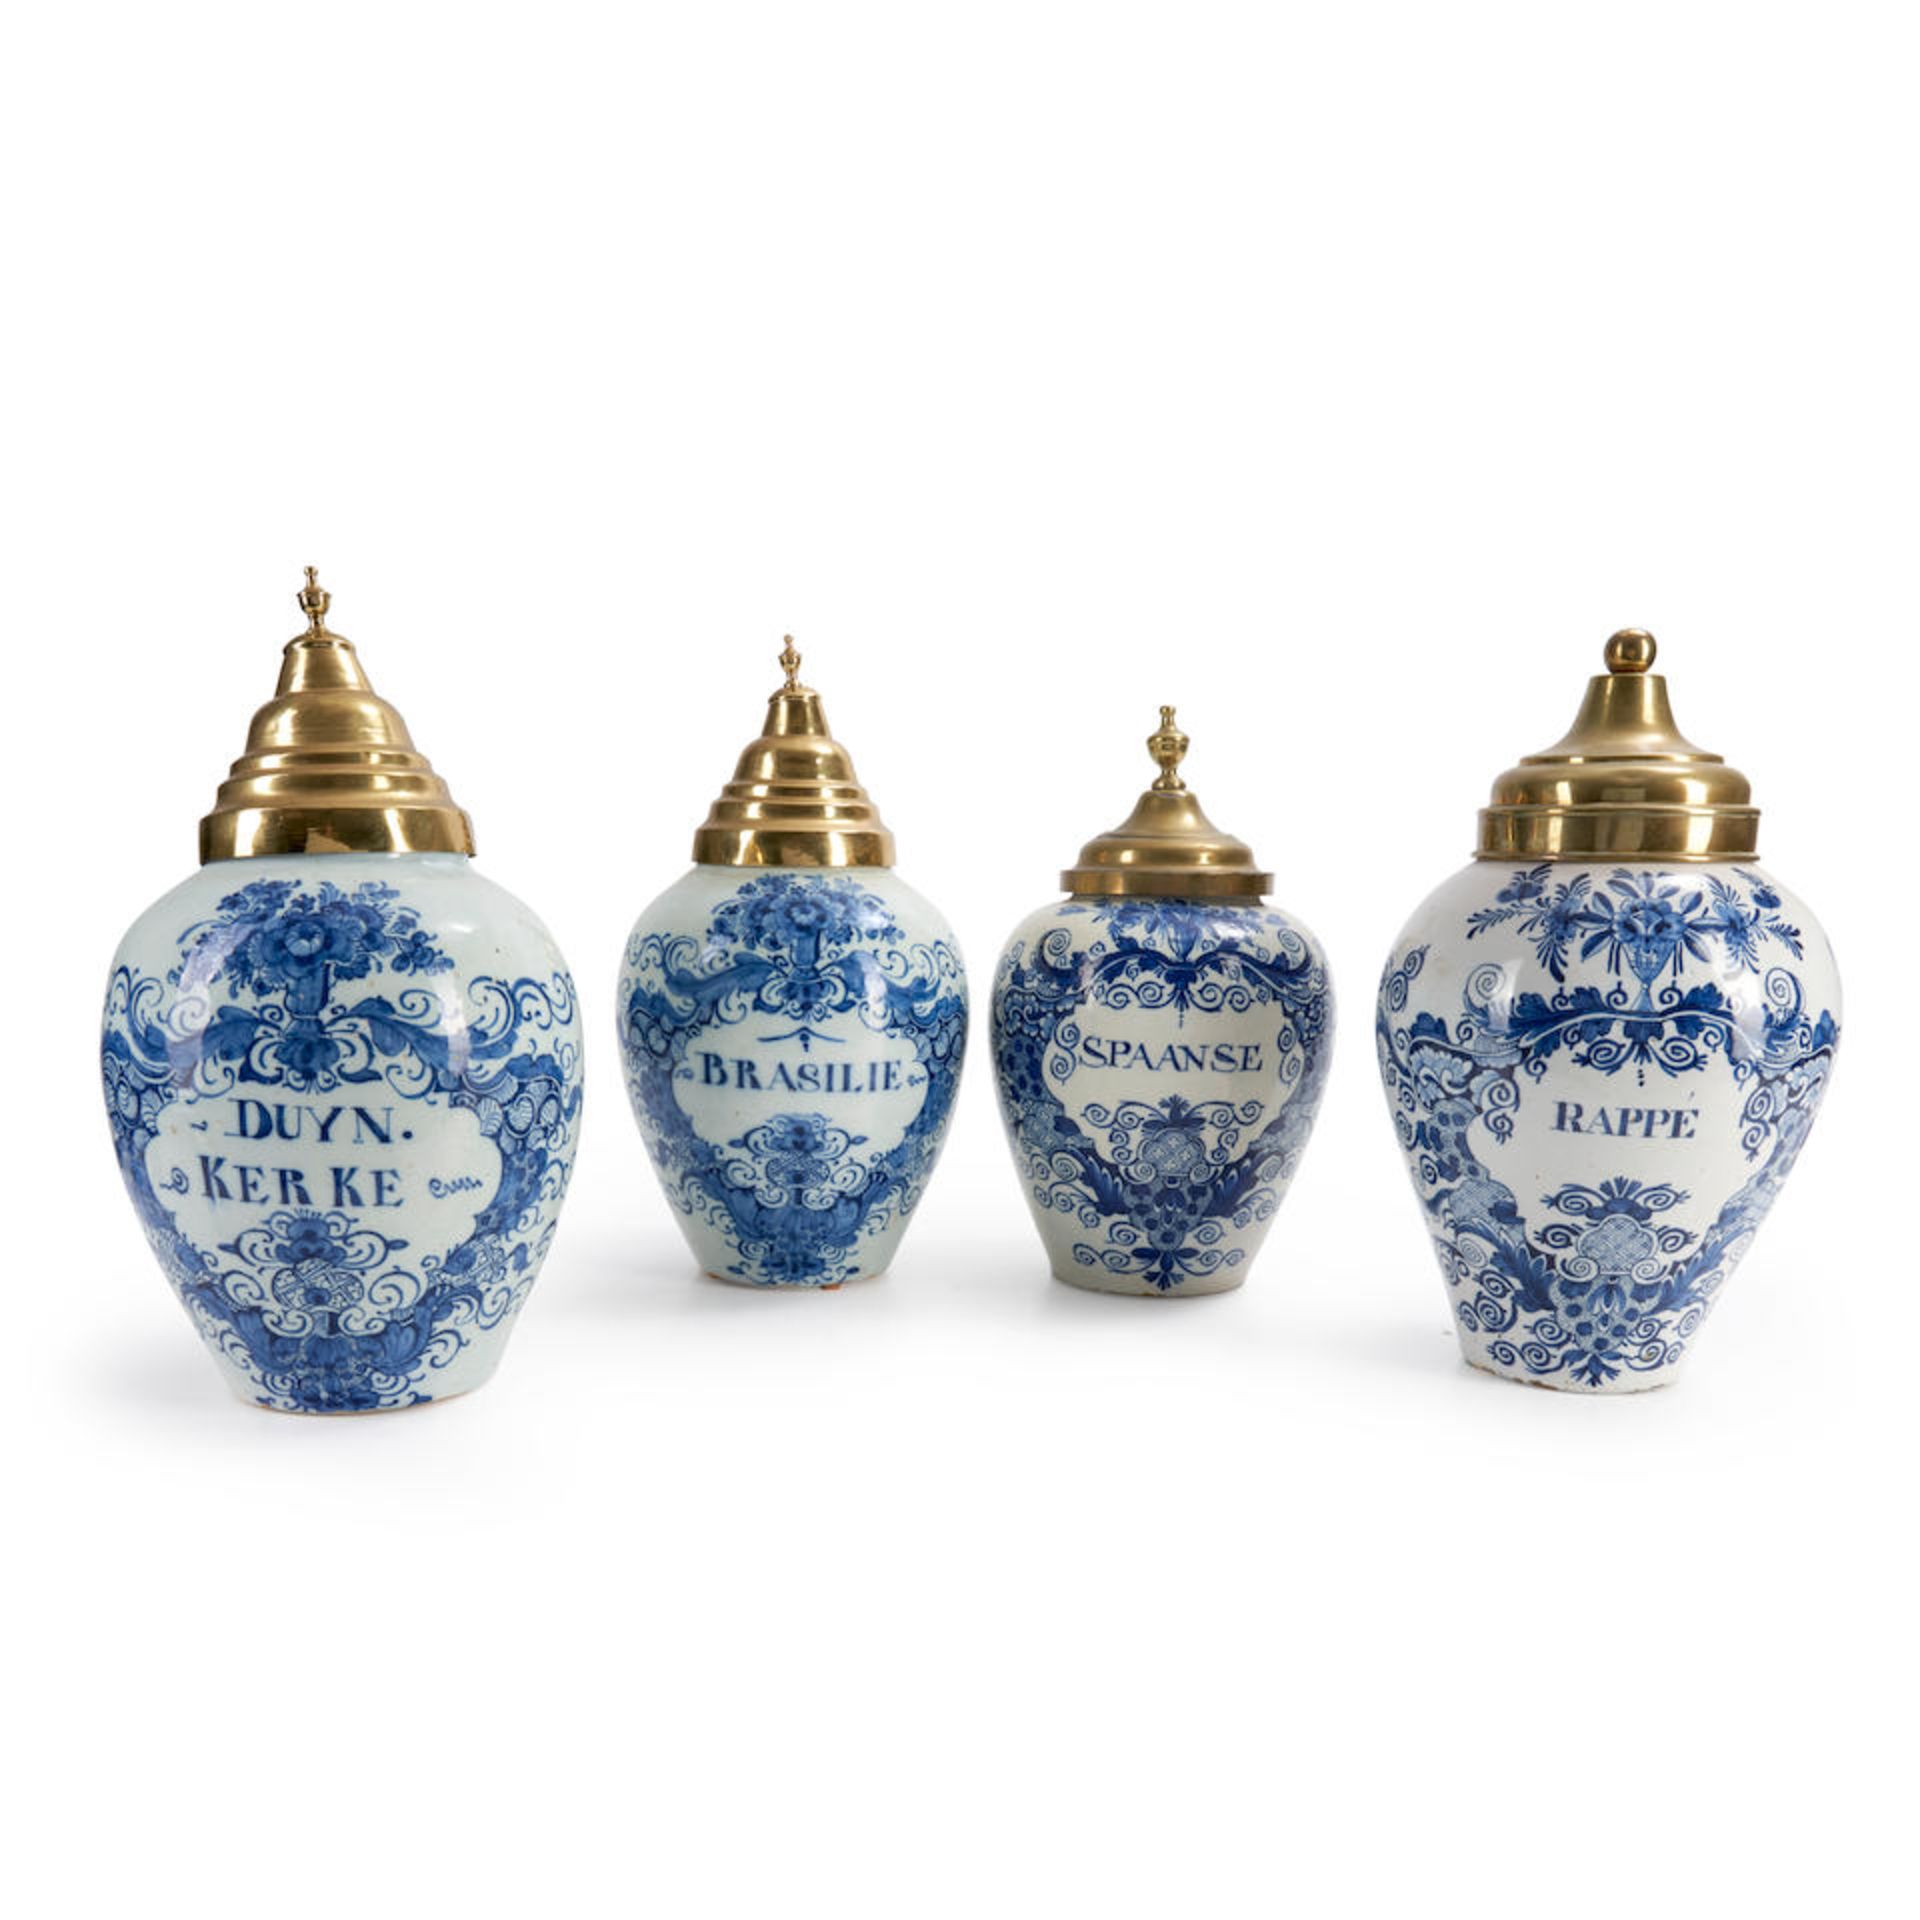 Four Delftware Tobacco Jars with Brass Covers, Holland, 18th century.